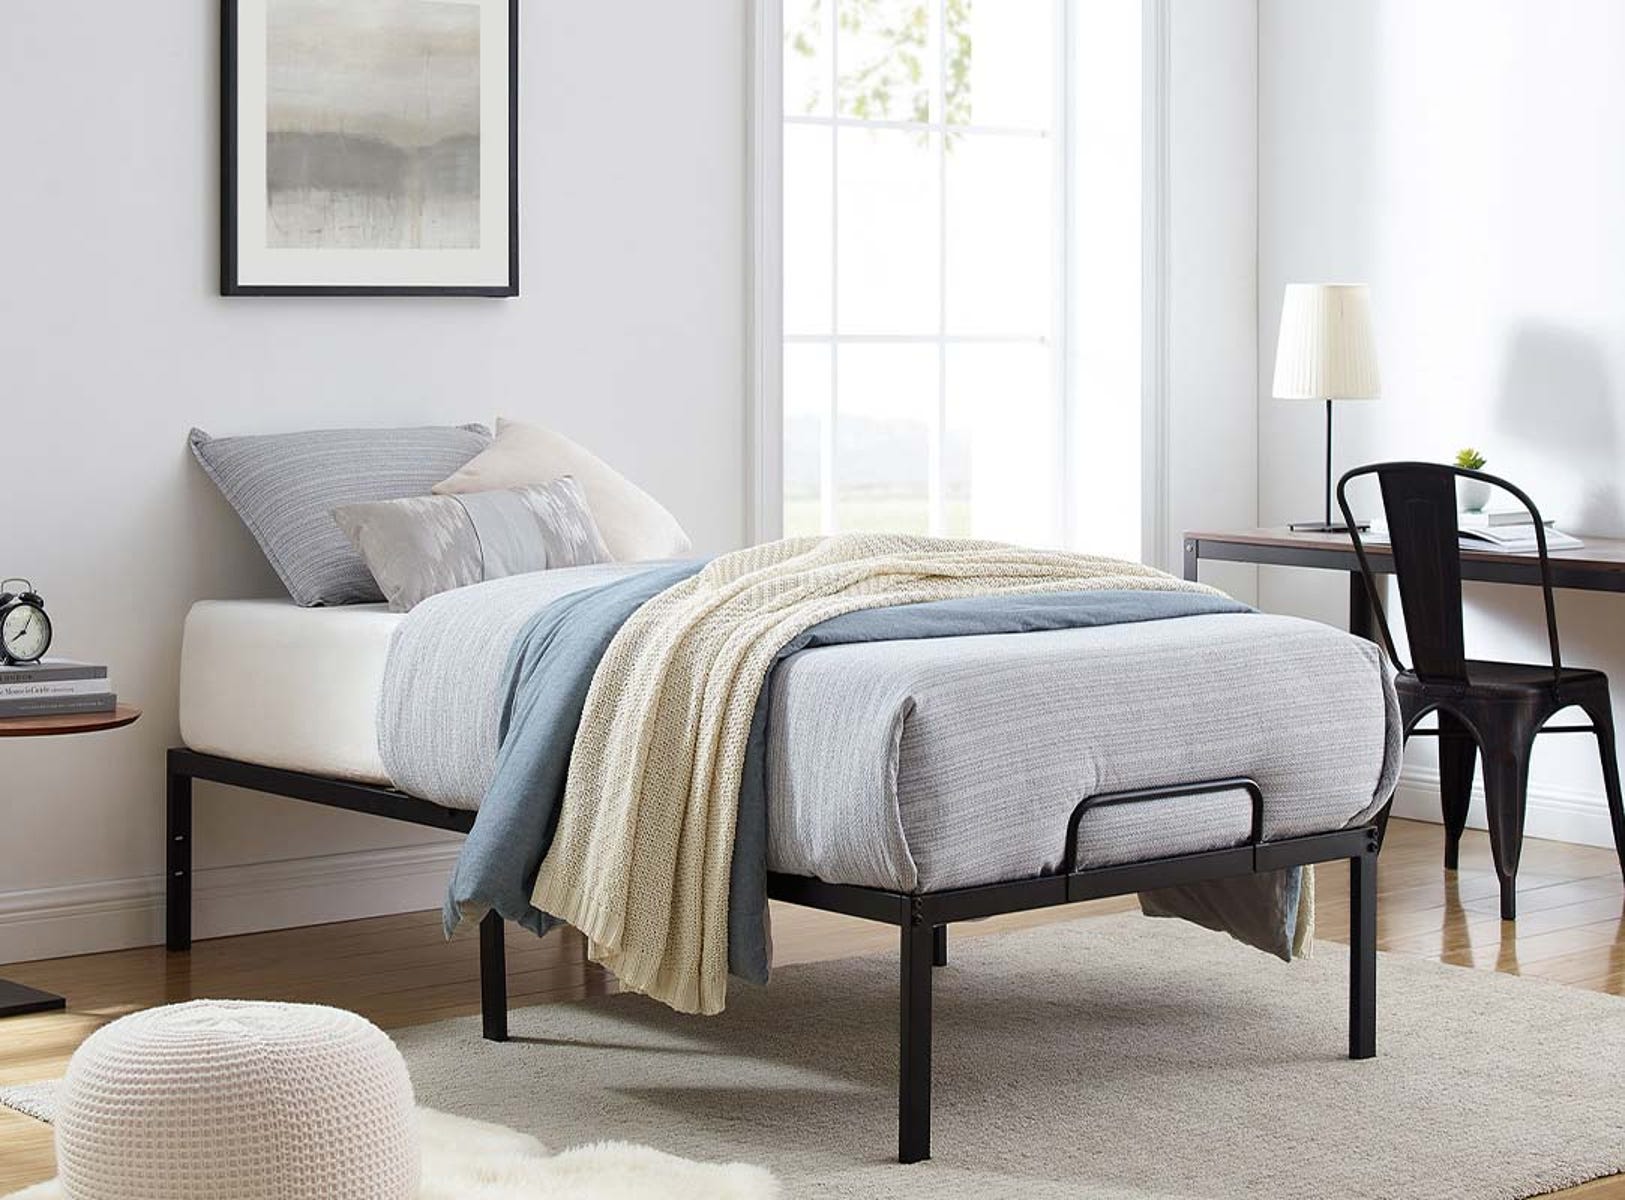 best place to buy bed frames and mattresses